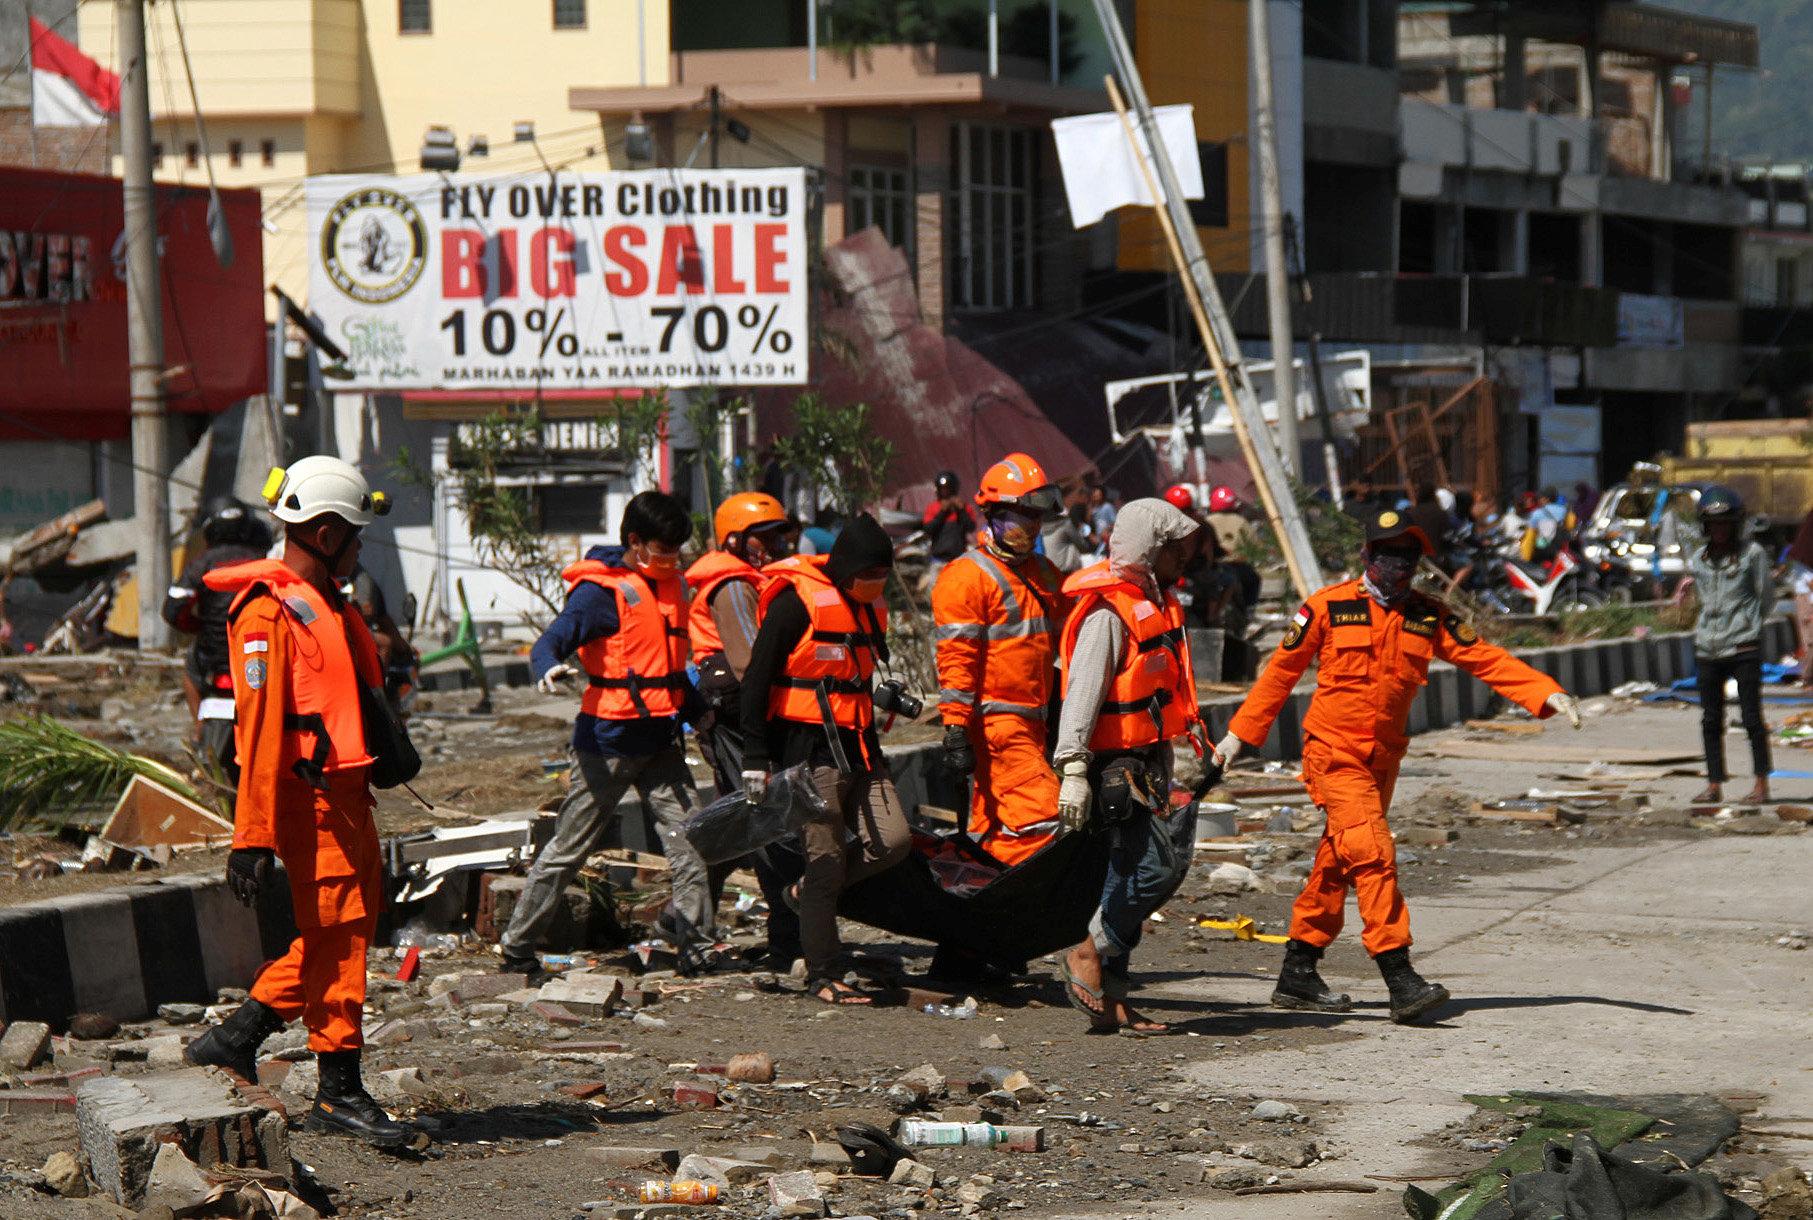 rescue workers dressed in orange carry a person on a gurney